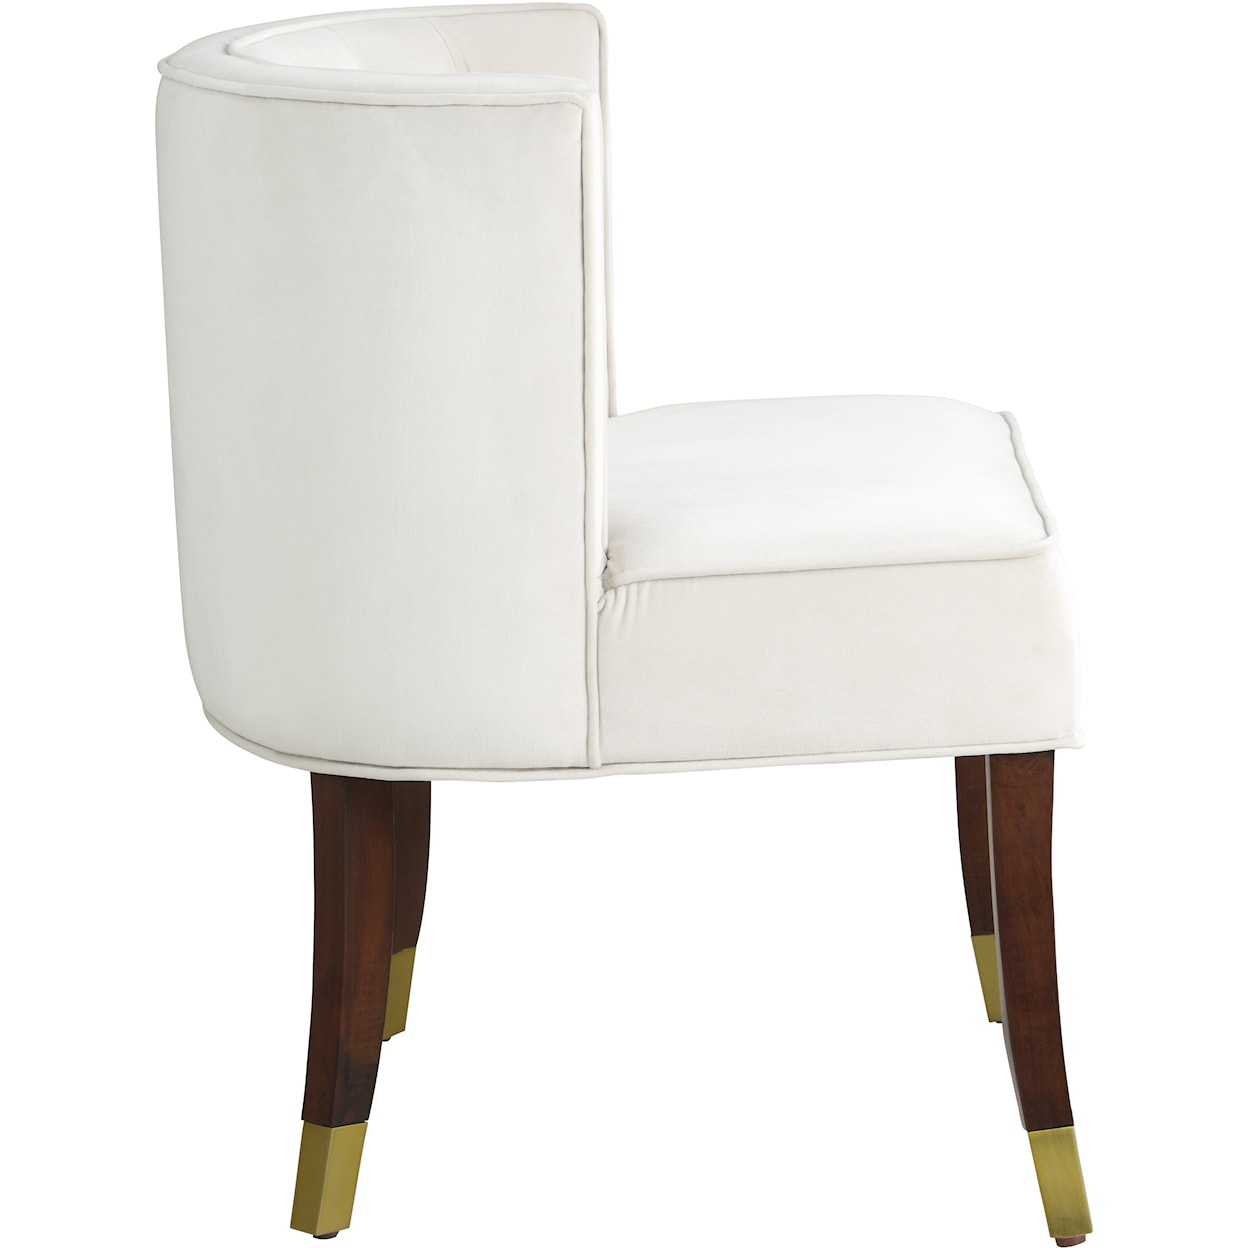 Meridian Furniture Perry Dining Chair